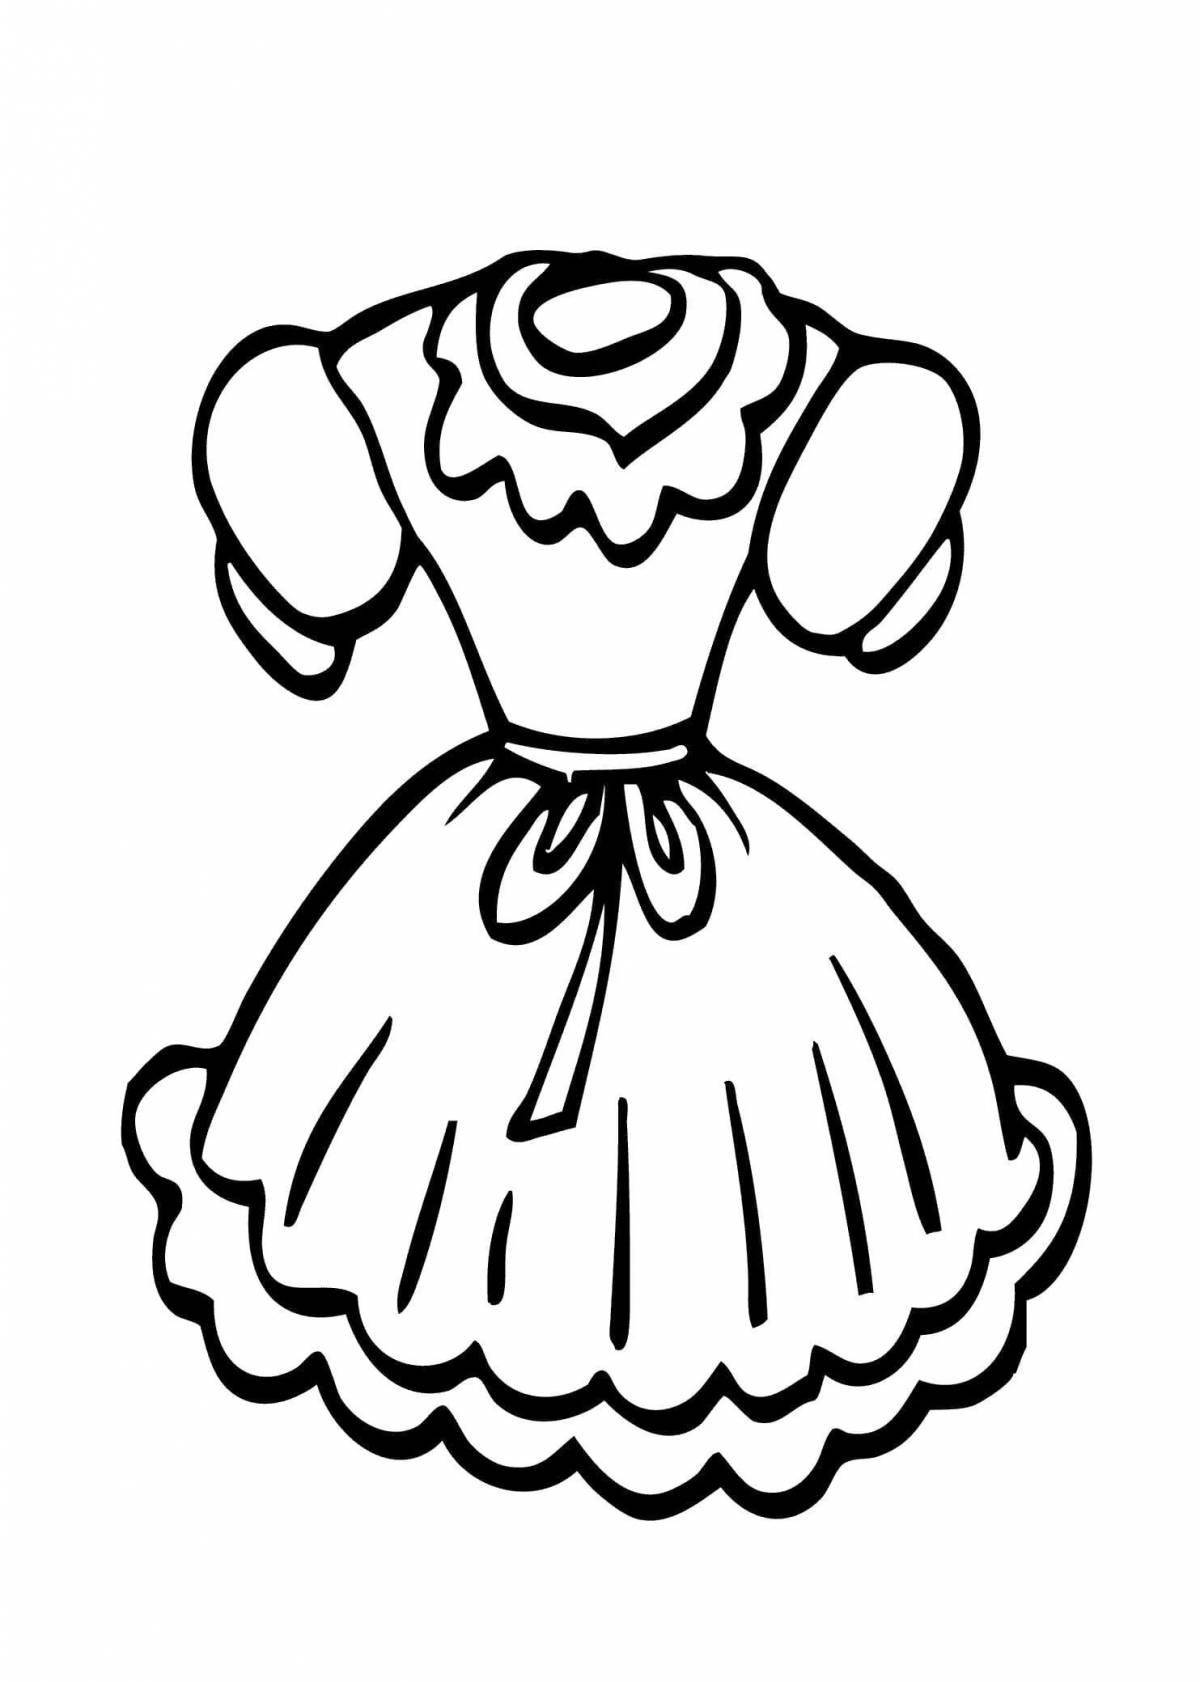 Charming doll dress coloring book for children 4-5 years old